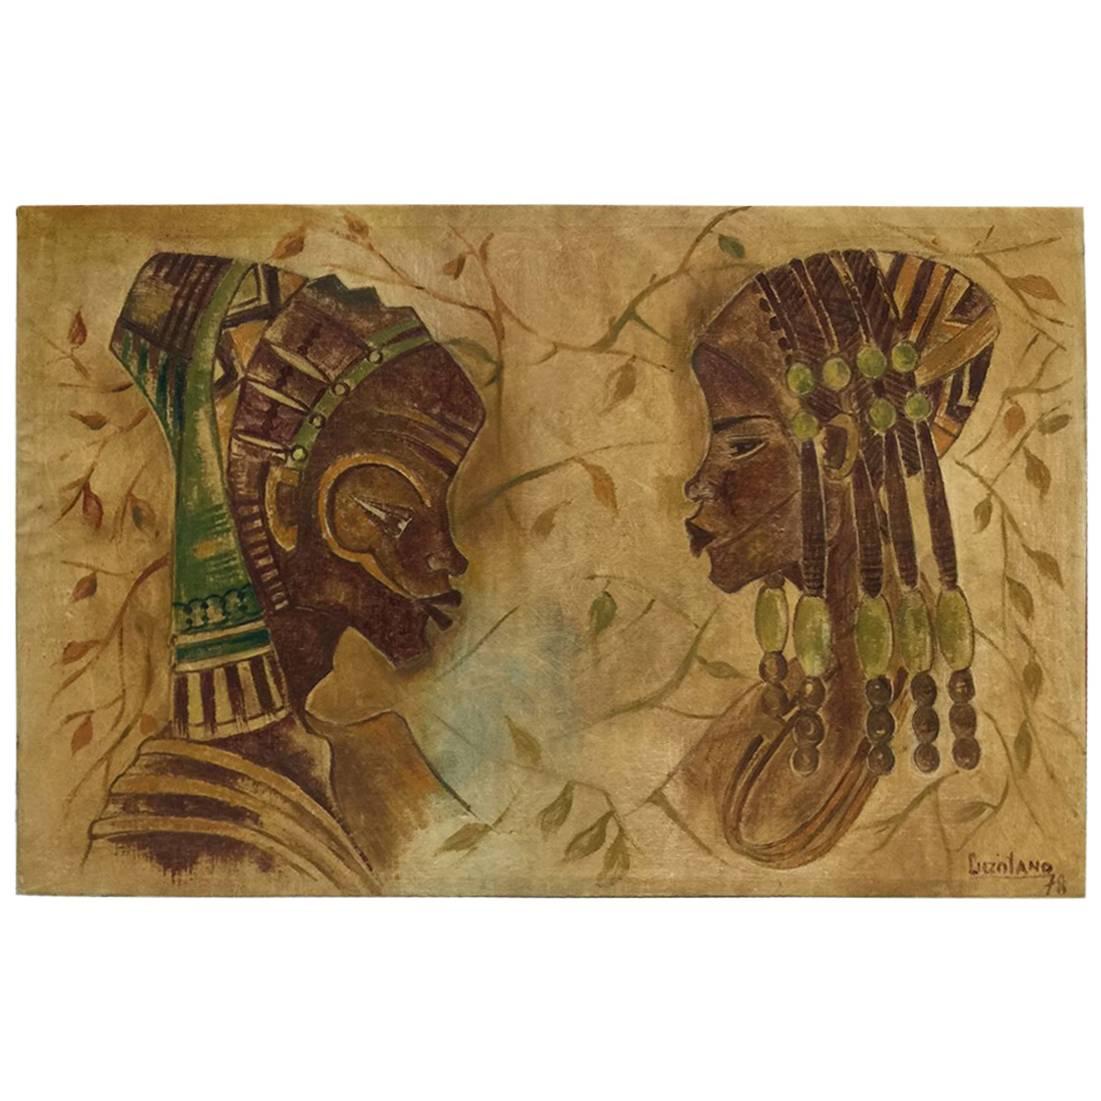 African Art by Luzolano, Oil Painting, 1978